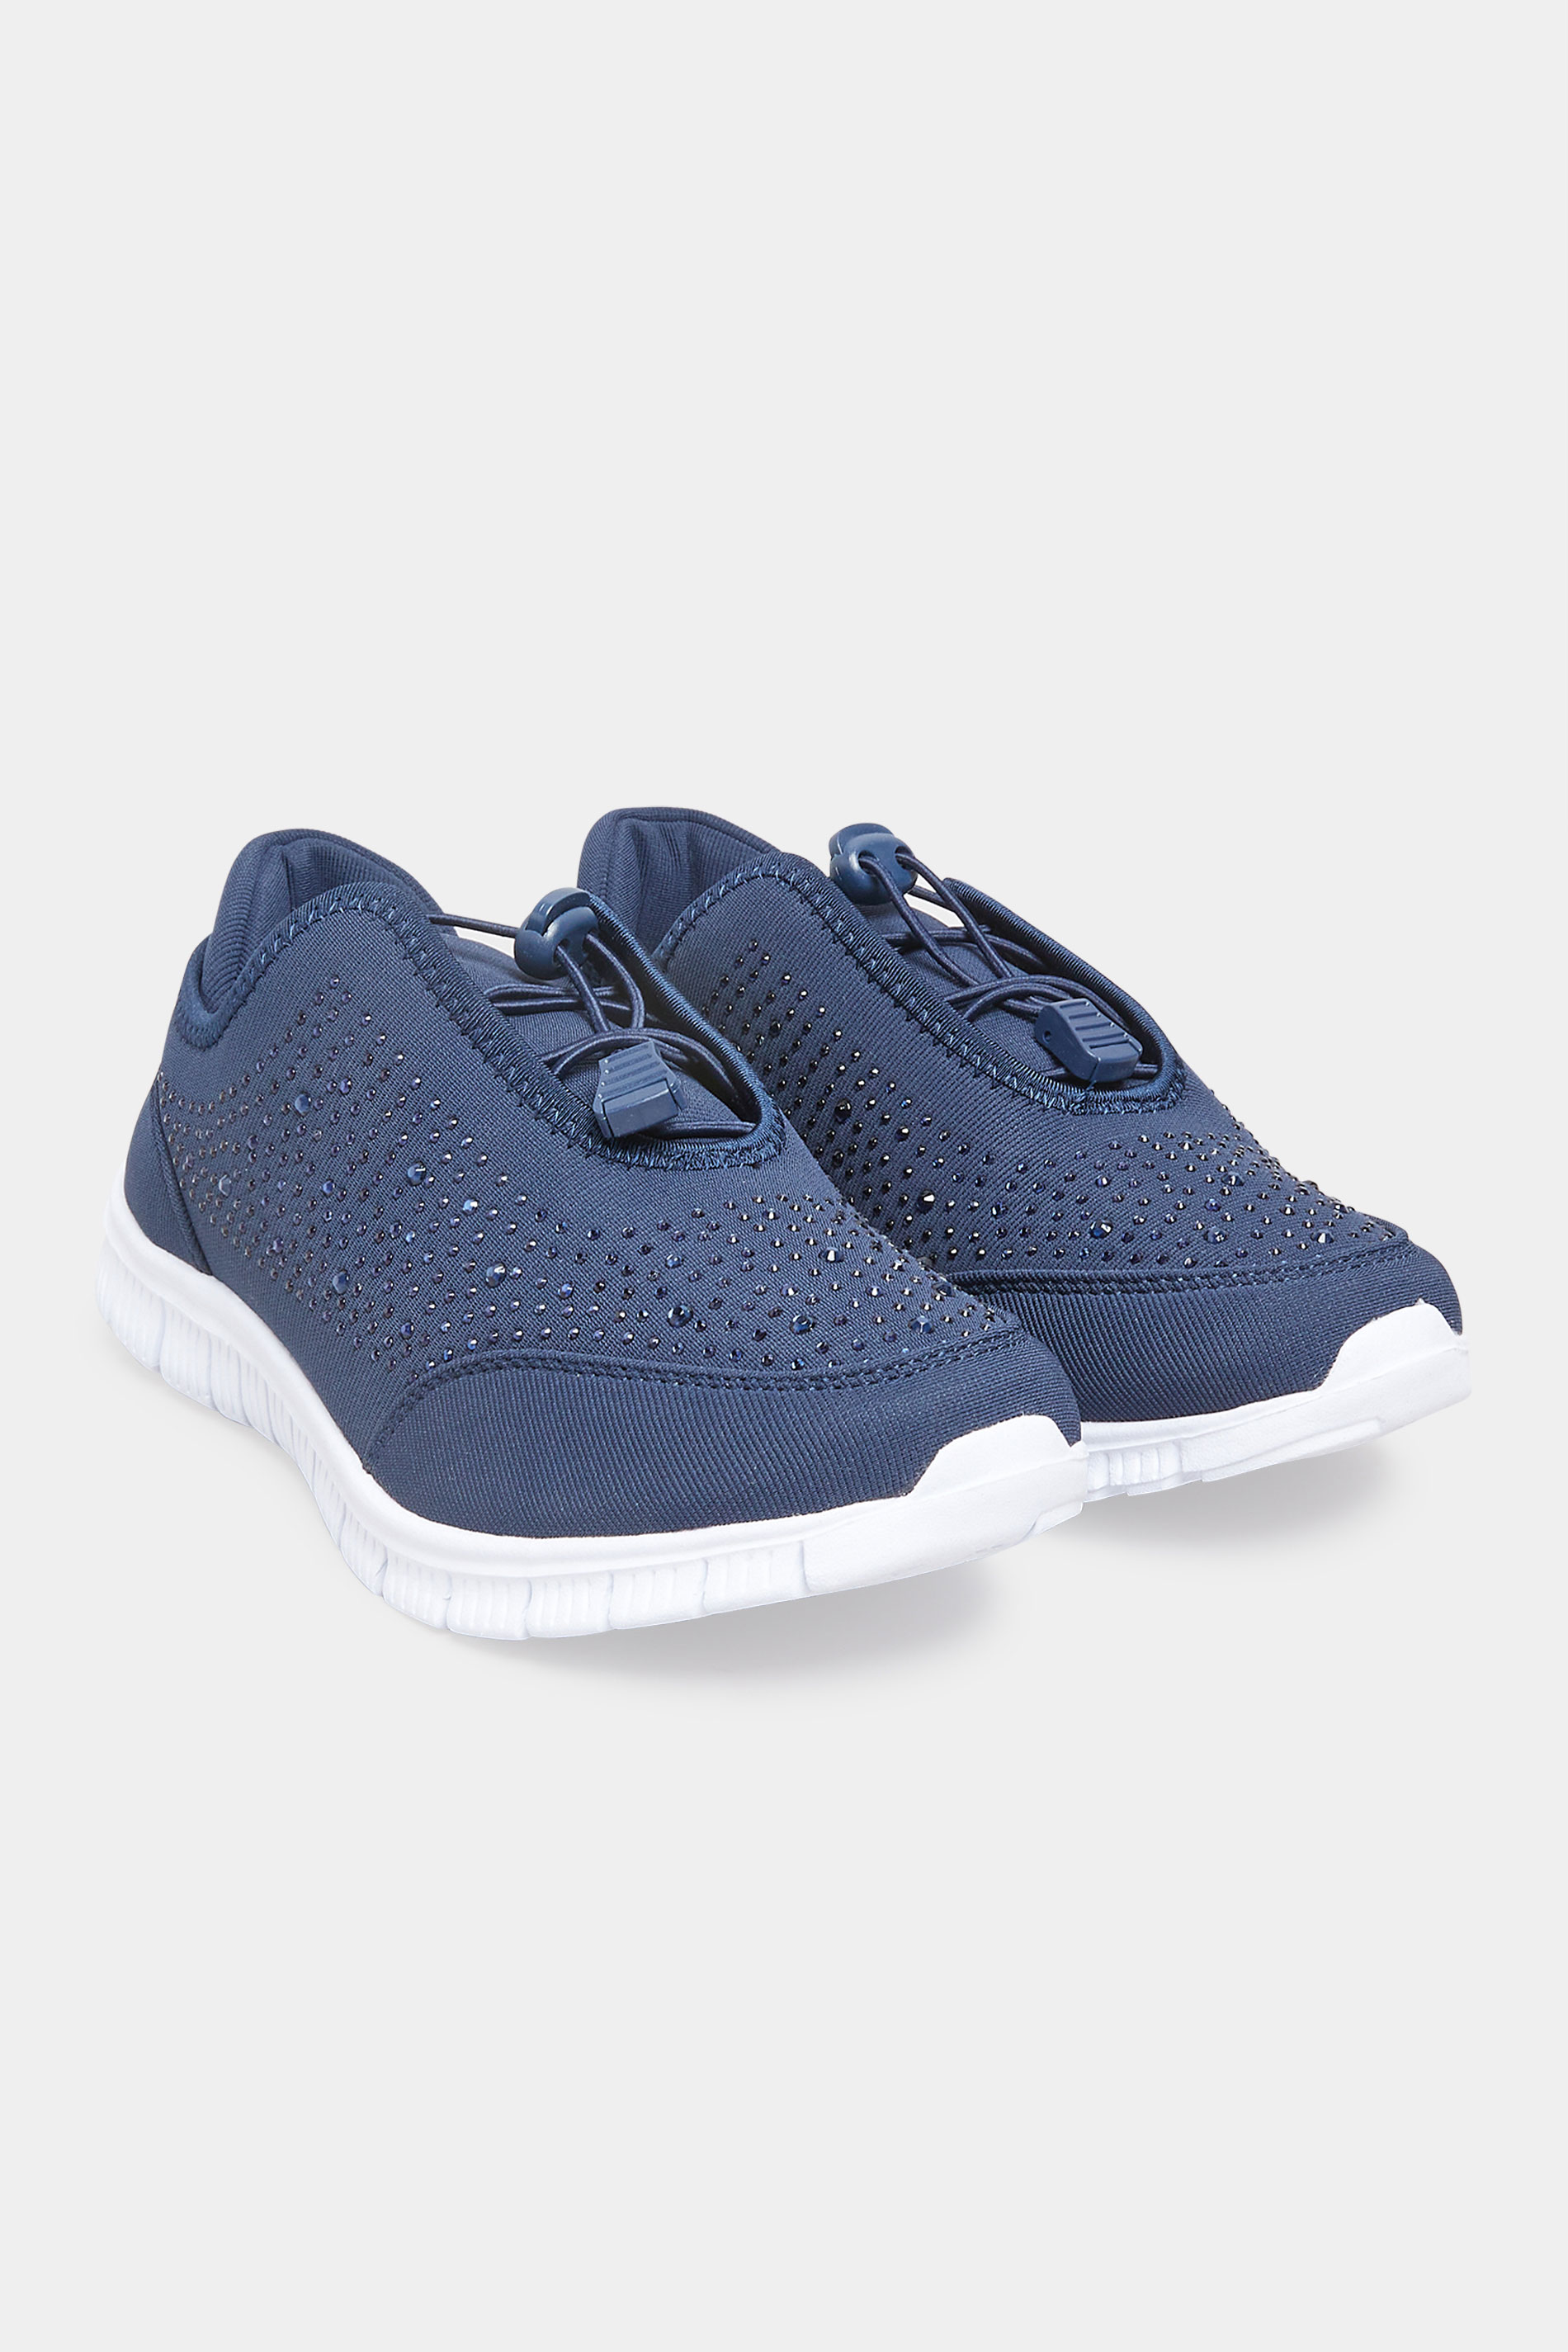 Navy Blue Embellished Trainers In Extra Wide EEE Fit_AR.jpg